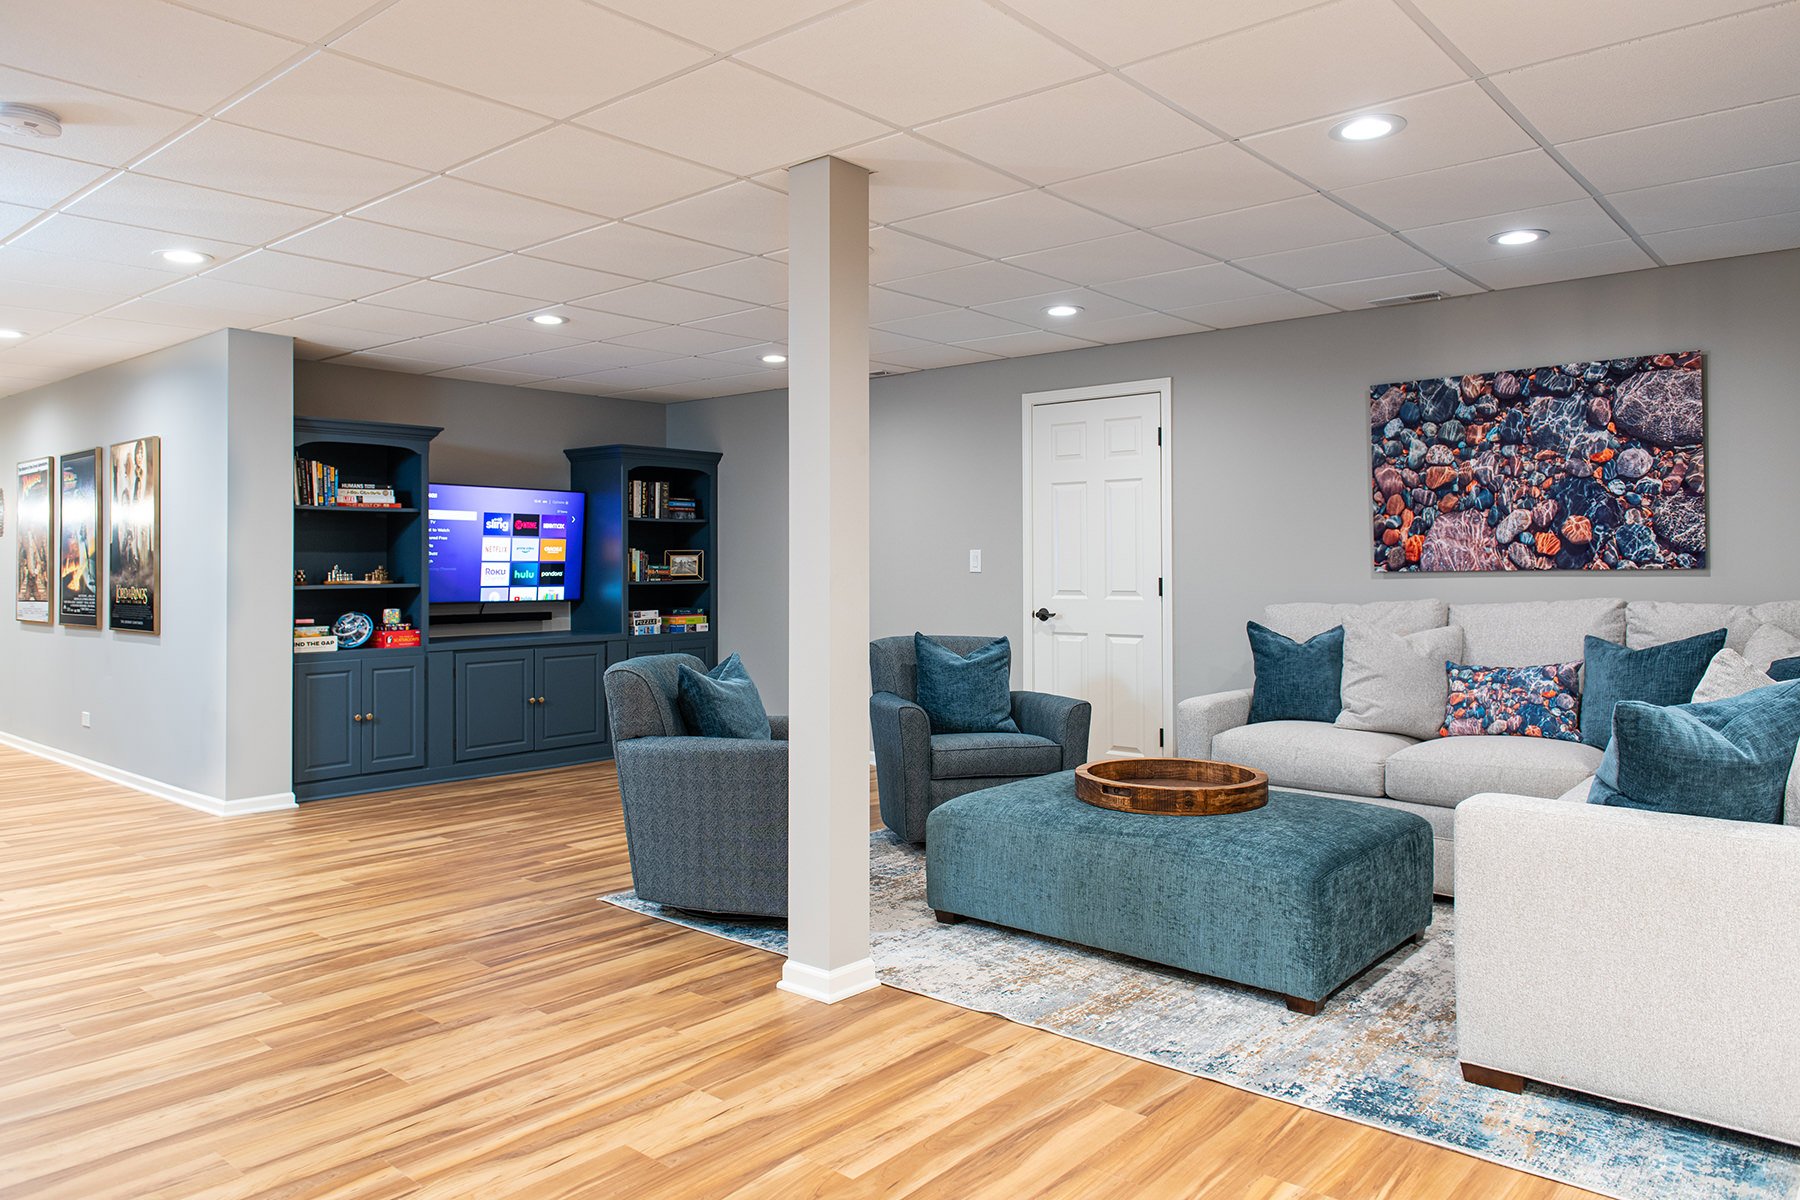 Basement with natural wood floors, gray walls and white ceiling, as well as custom blue cabinetry and recessed lighting.